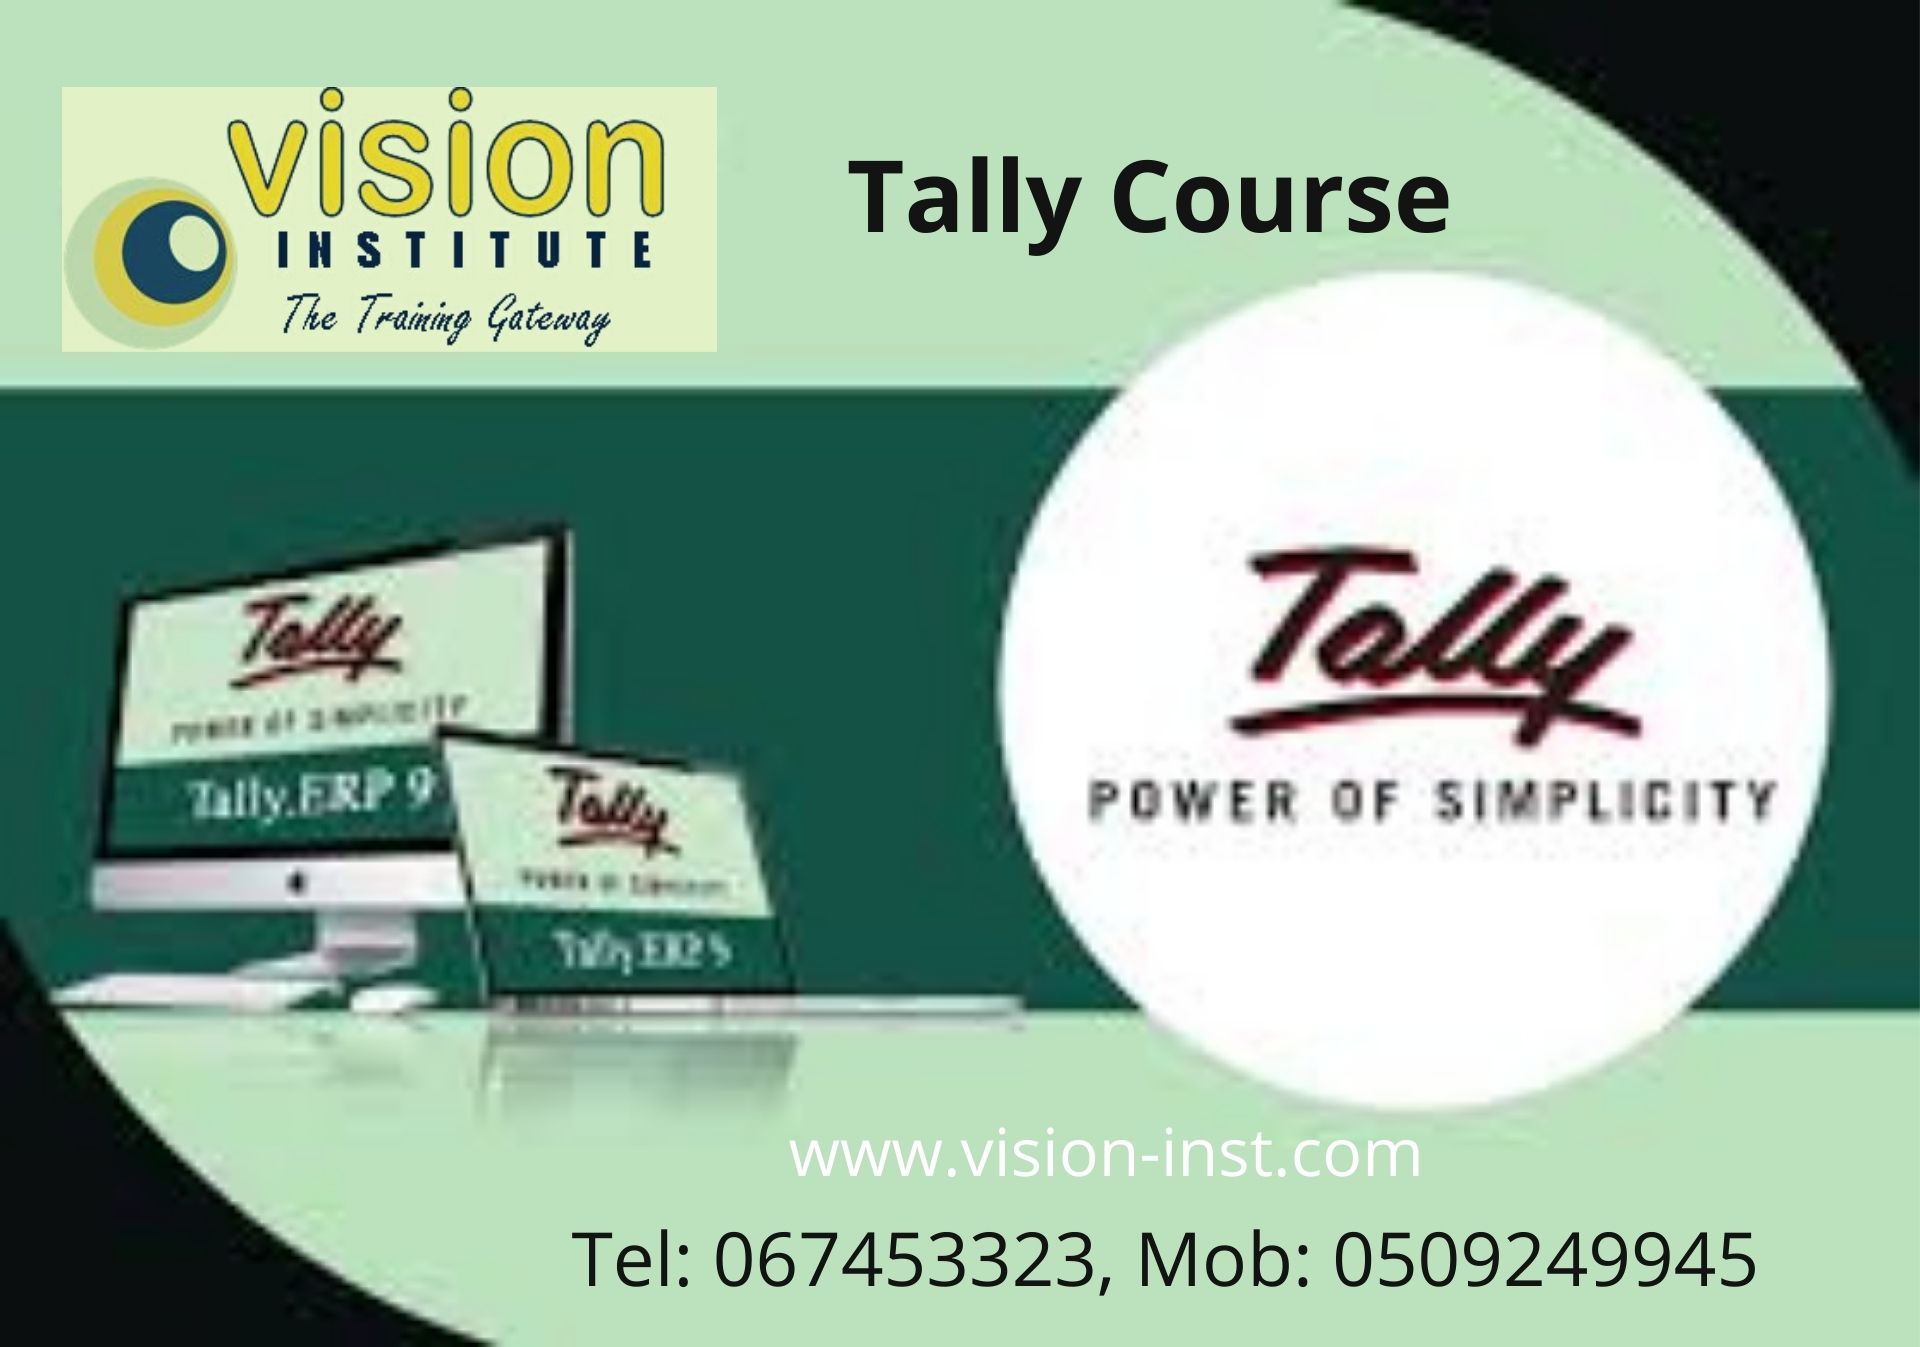 Tally Training at Vision Institute. Call 0509249945